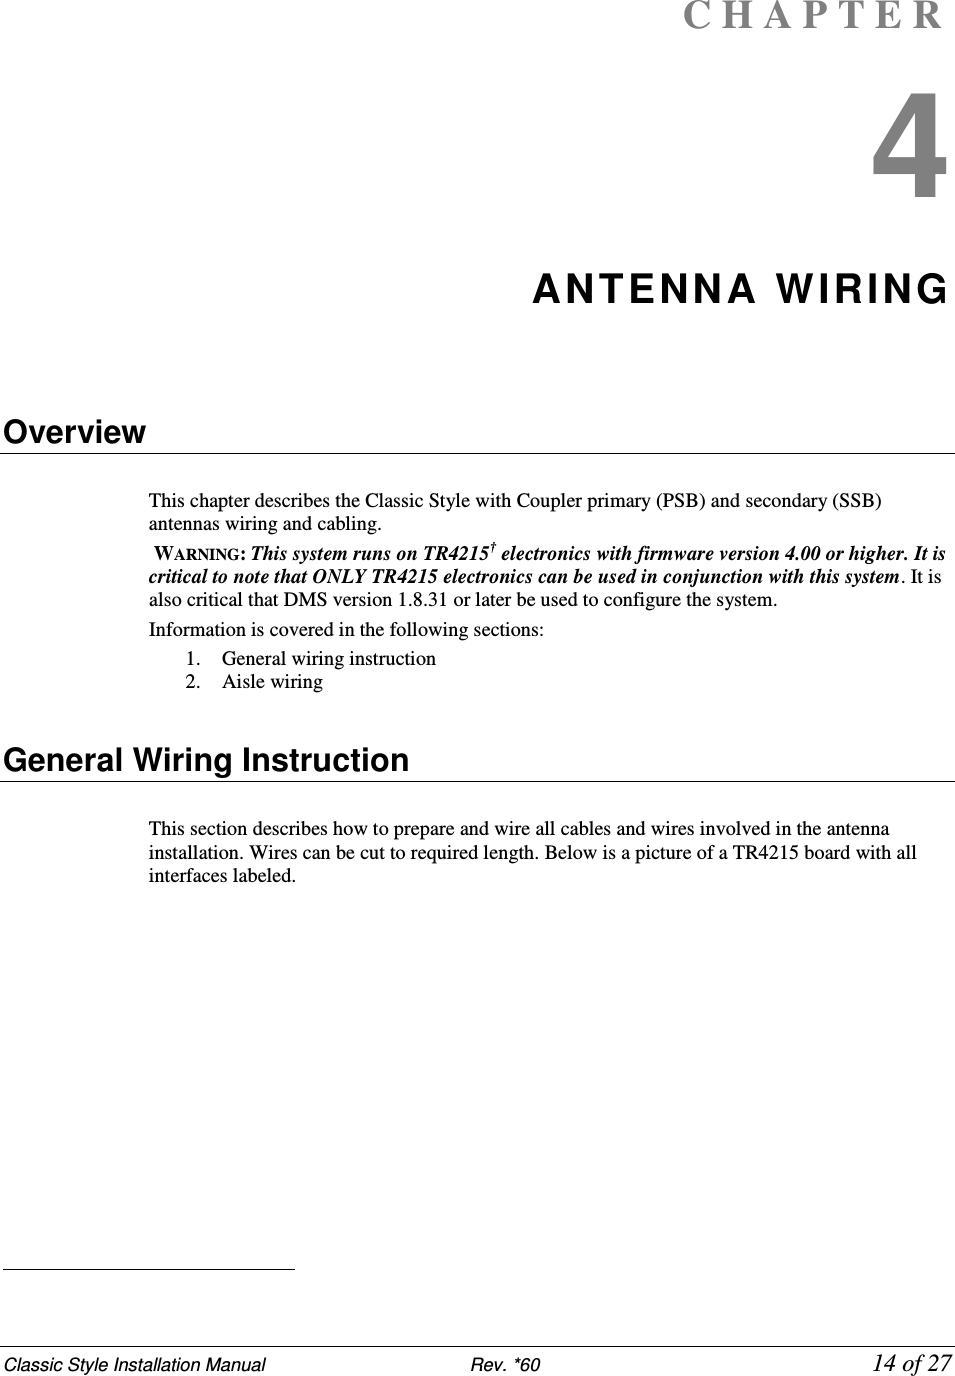 Classic Style Installation Manual                           Rev. *60             14 of 27 C H A P T E R  4 ANTENNA WIRING    Overview  This chapter describes the Classic Style with Coupler primary (PSB) and secondary (SSB) antennas wiring and cabling.  WARNING: This system runs on TR4215† electronics with firmware version 4.00 or higher. It is critical to note that ONLY TR4215 electronics can be used in conjunction with this system. It is also critical that DMS version 1.8.31 or later be used to configure the system. Information is covered in the following sections: 1. General wiring instruction 2. Aisle wiring    General Wiring Instruction  This section describes how to prepare and wire all cables and wires involved in the antenna installation. Wires can be cut to required length. Below is a picture of a TR4215 board with all interfaces labeled.                                                    